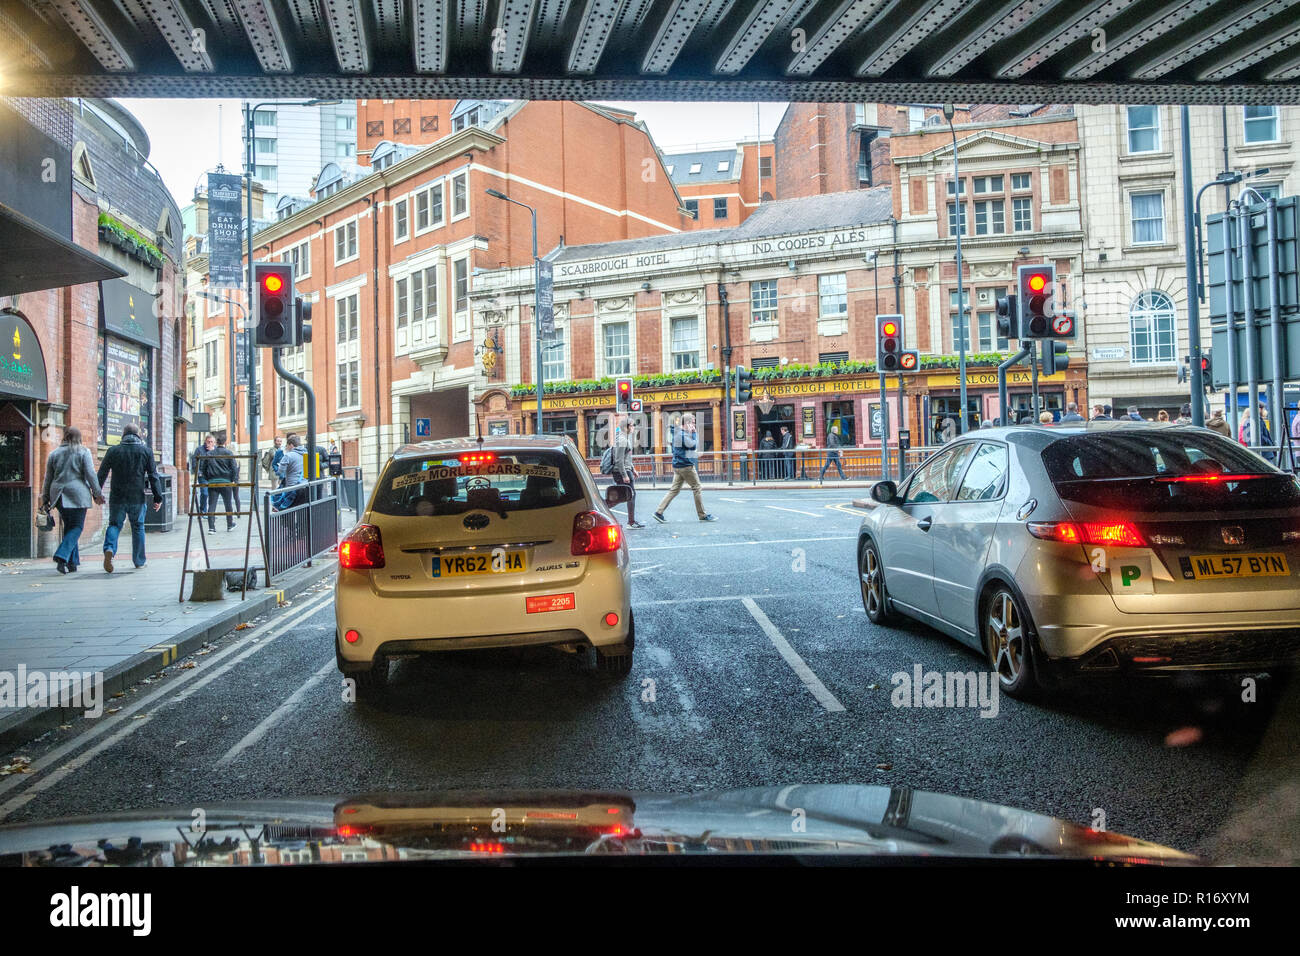 Leeds, England - October 27, 2018: Traffic in the city centre of Leeds, which is the major city in West Yorkshire. Stock Photo